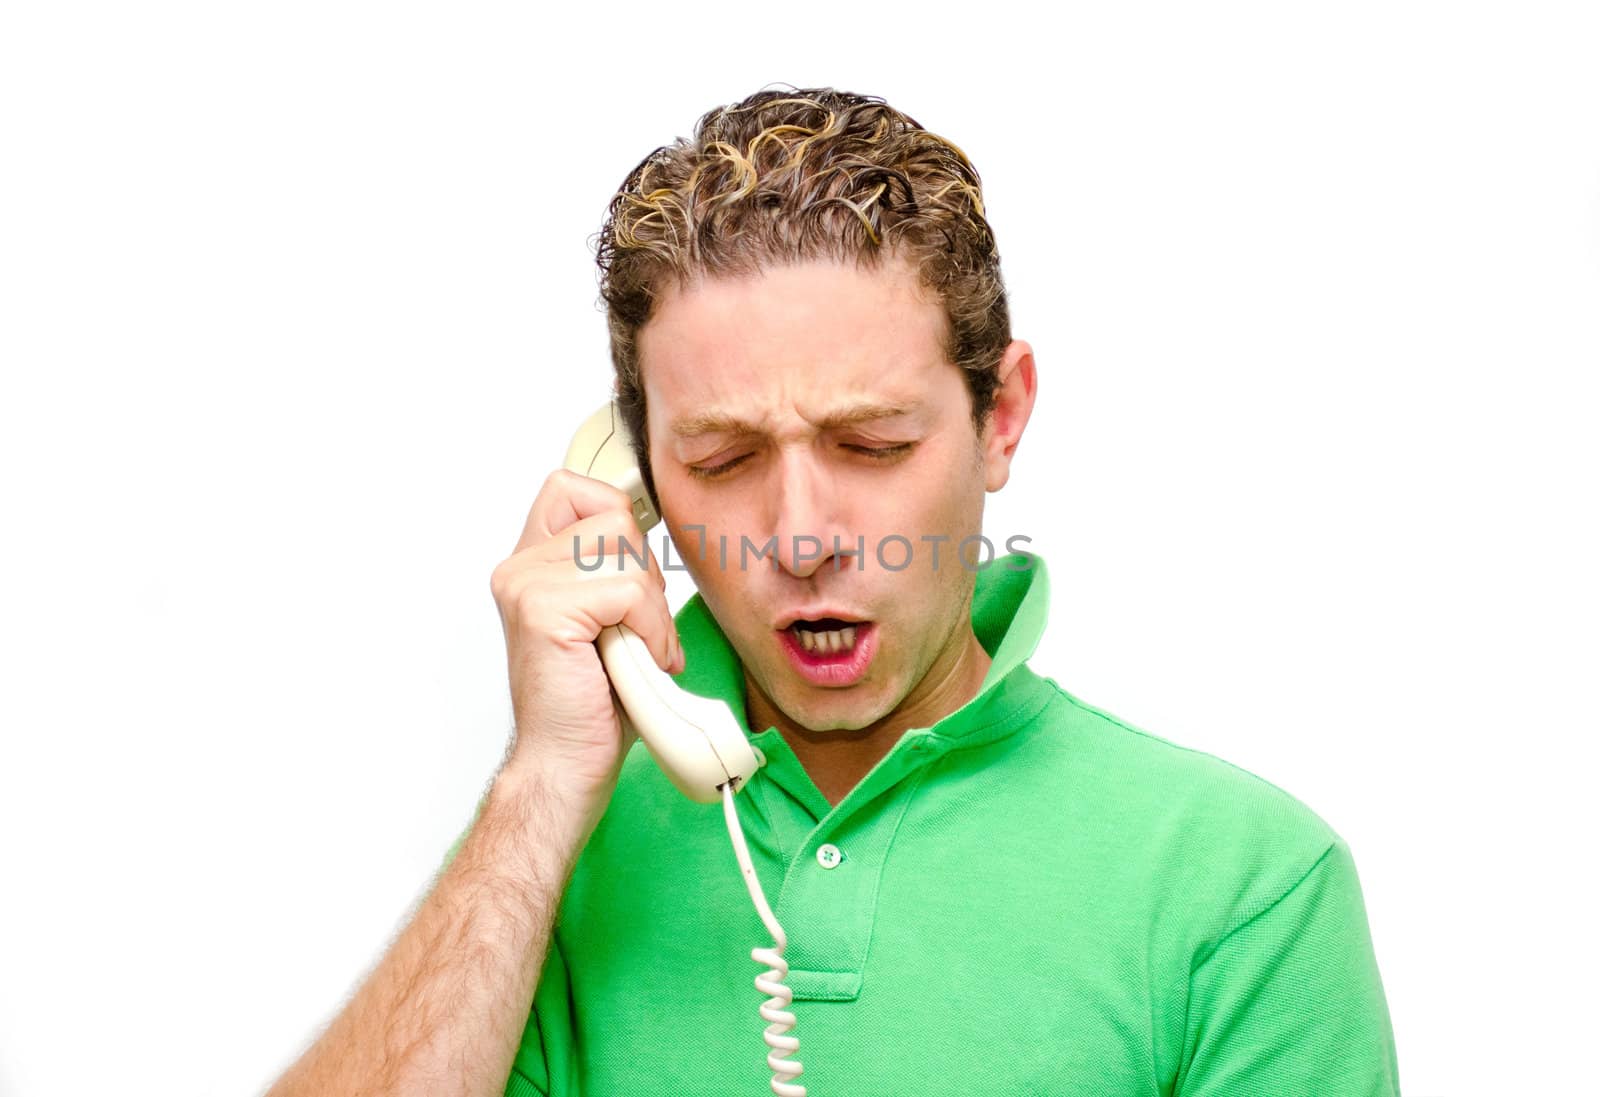 Angry, furious or frustrated guy yelling on the phone